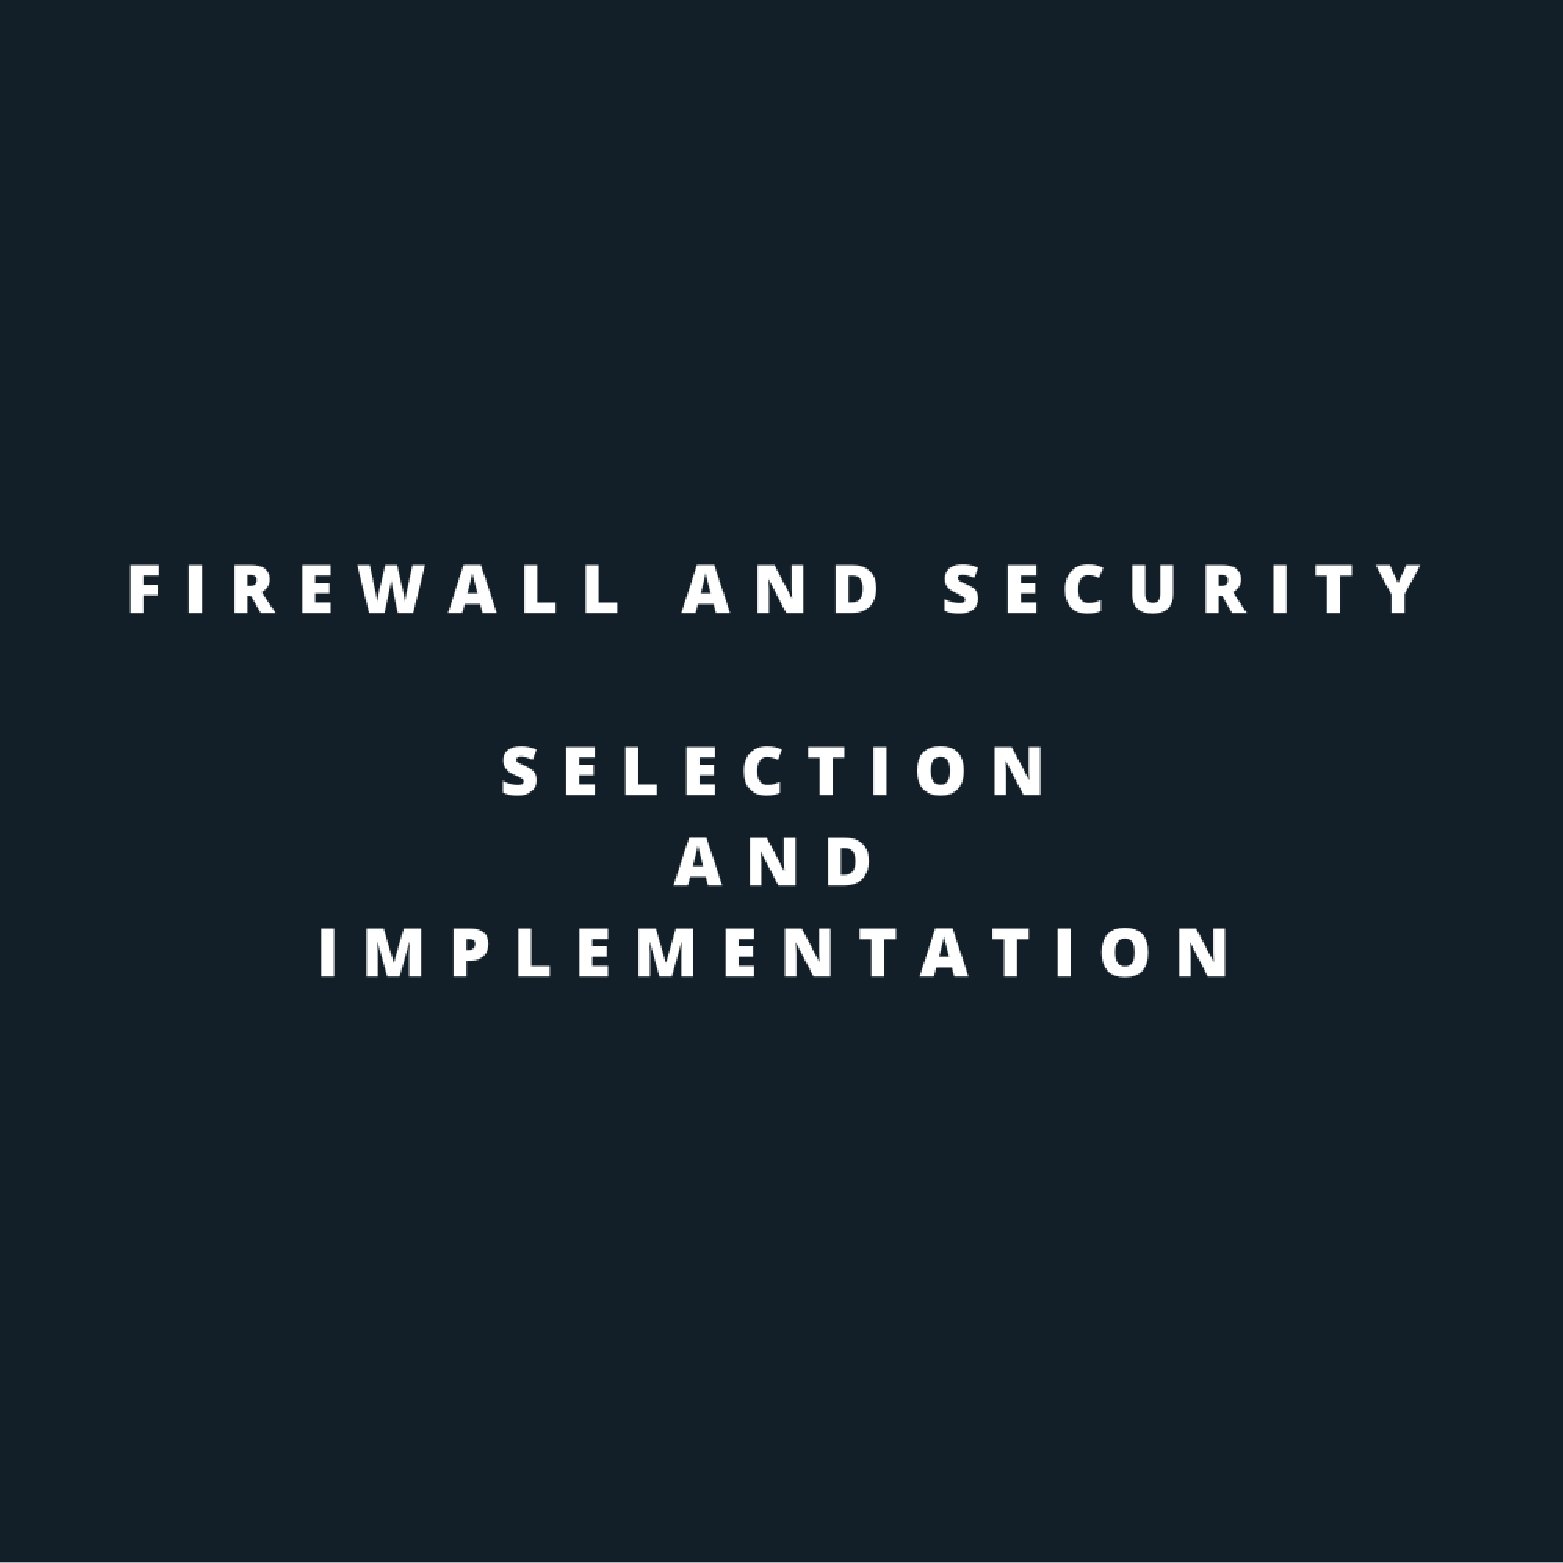 Firewall and security selection and implementation